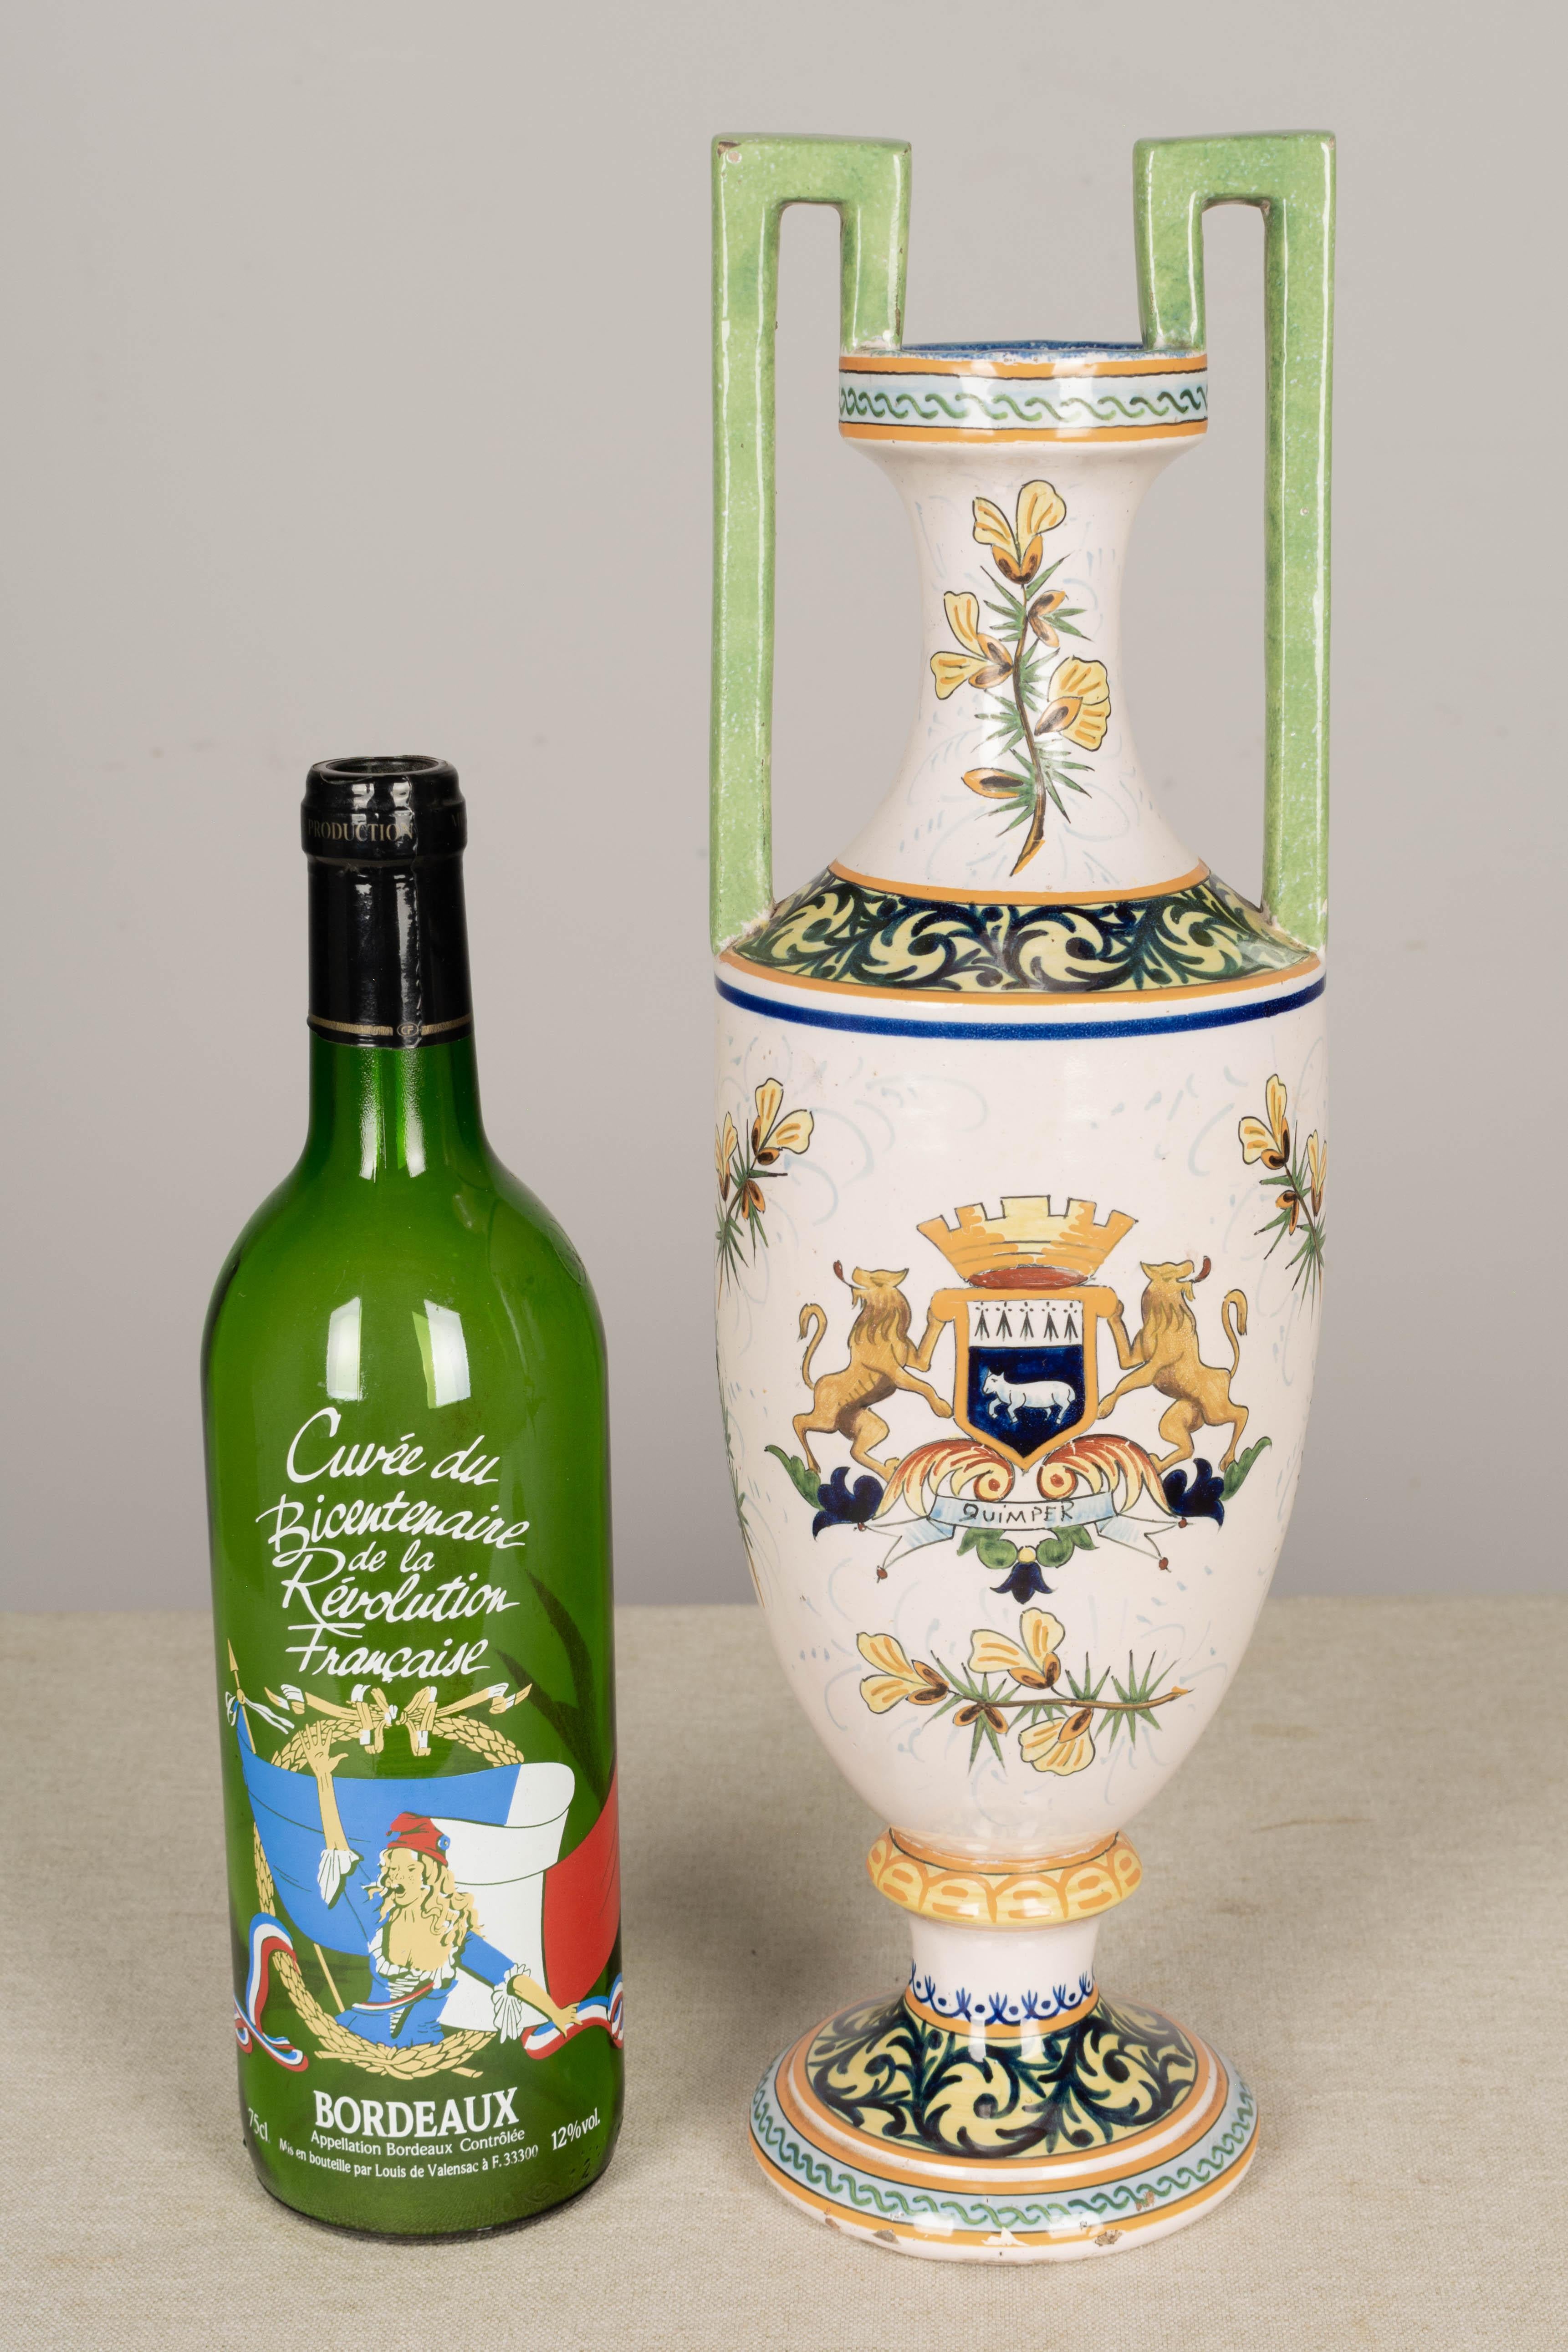 French faience vase signed HR Quimper, hand-painted with a man and woman depicted in traditional country attire in a pastoral setting. The reverse side has the Quimper coat of arms. Urn form with tall slender proportions and double handles painted